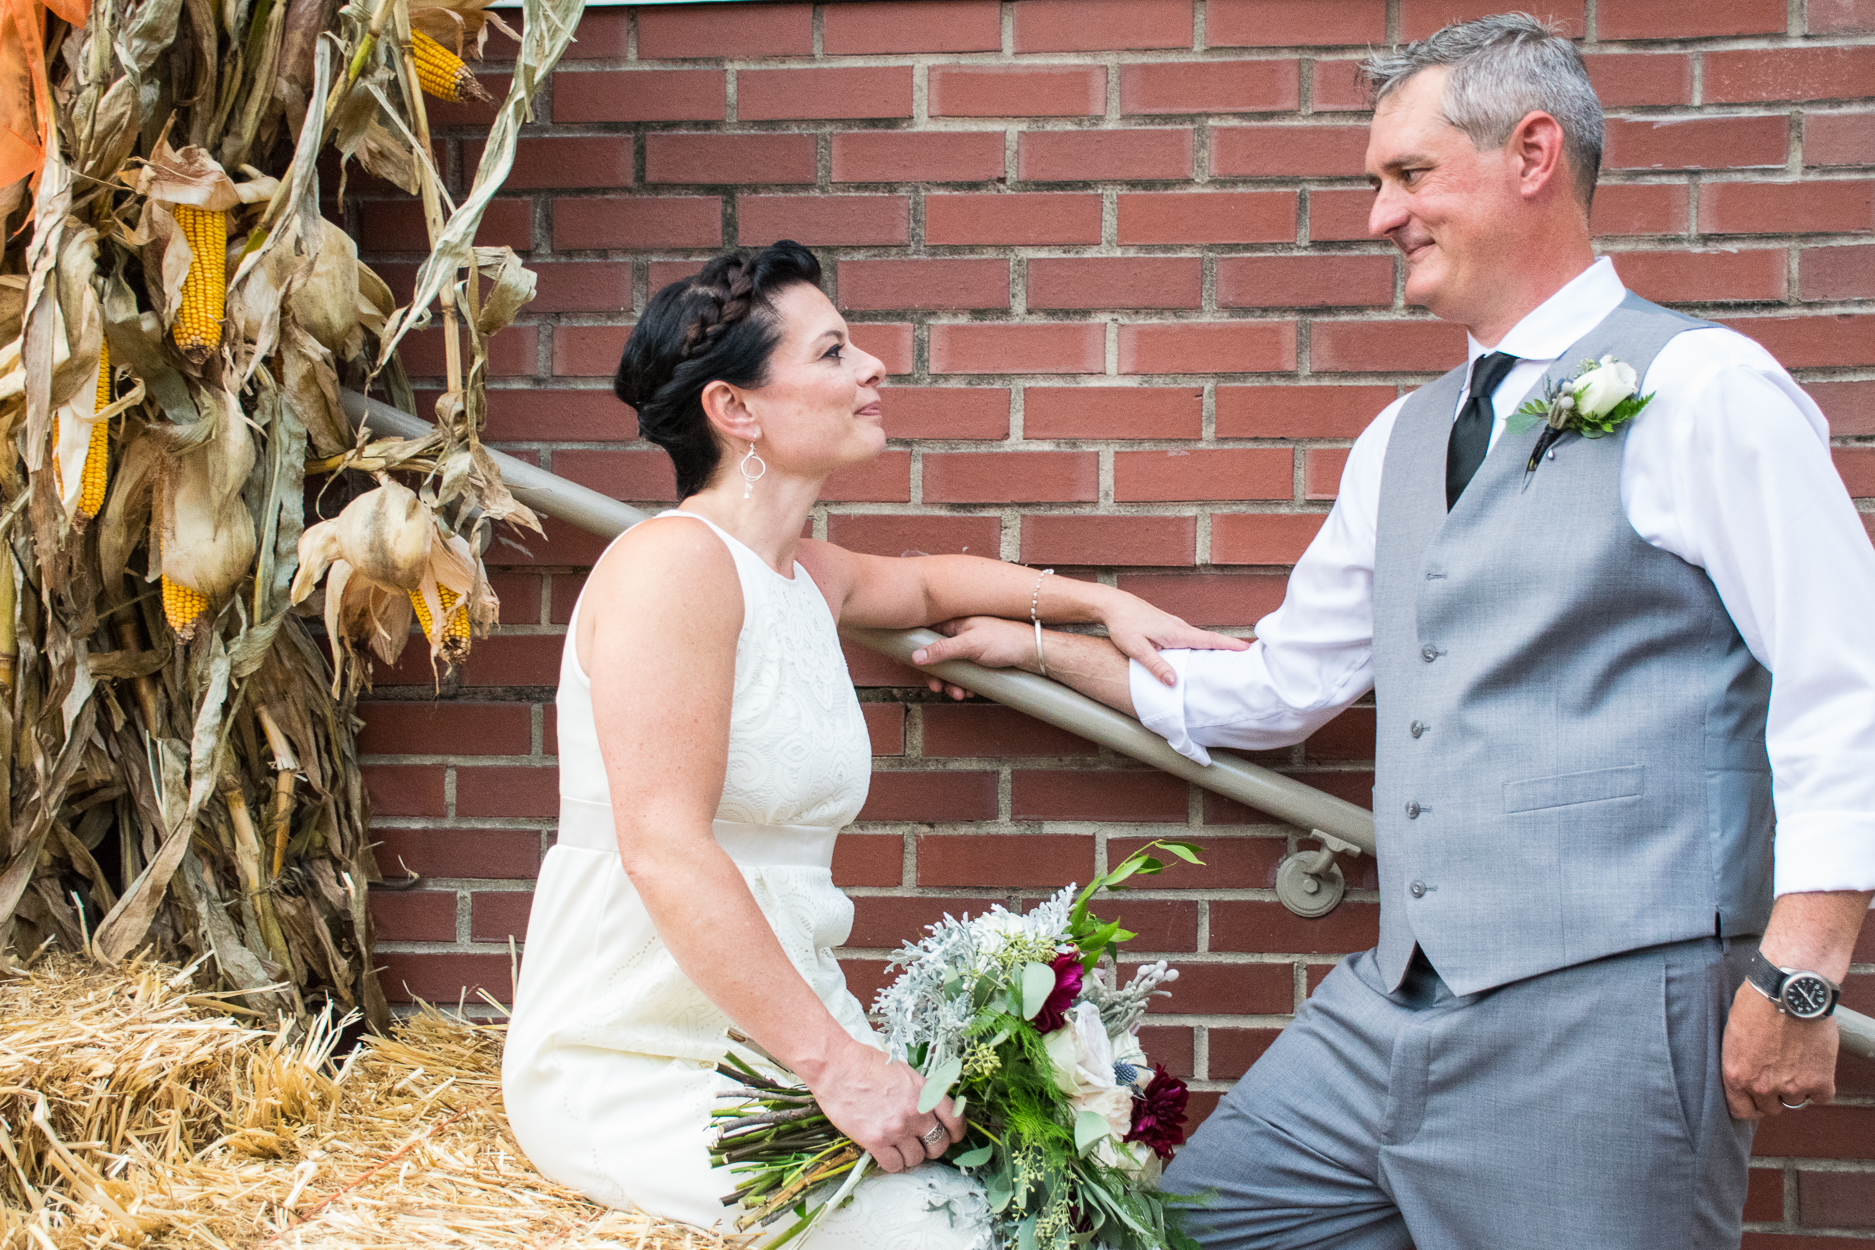 A Market Square wedding in downtown Knoxville.